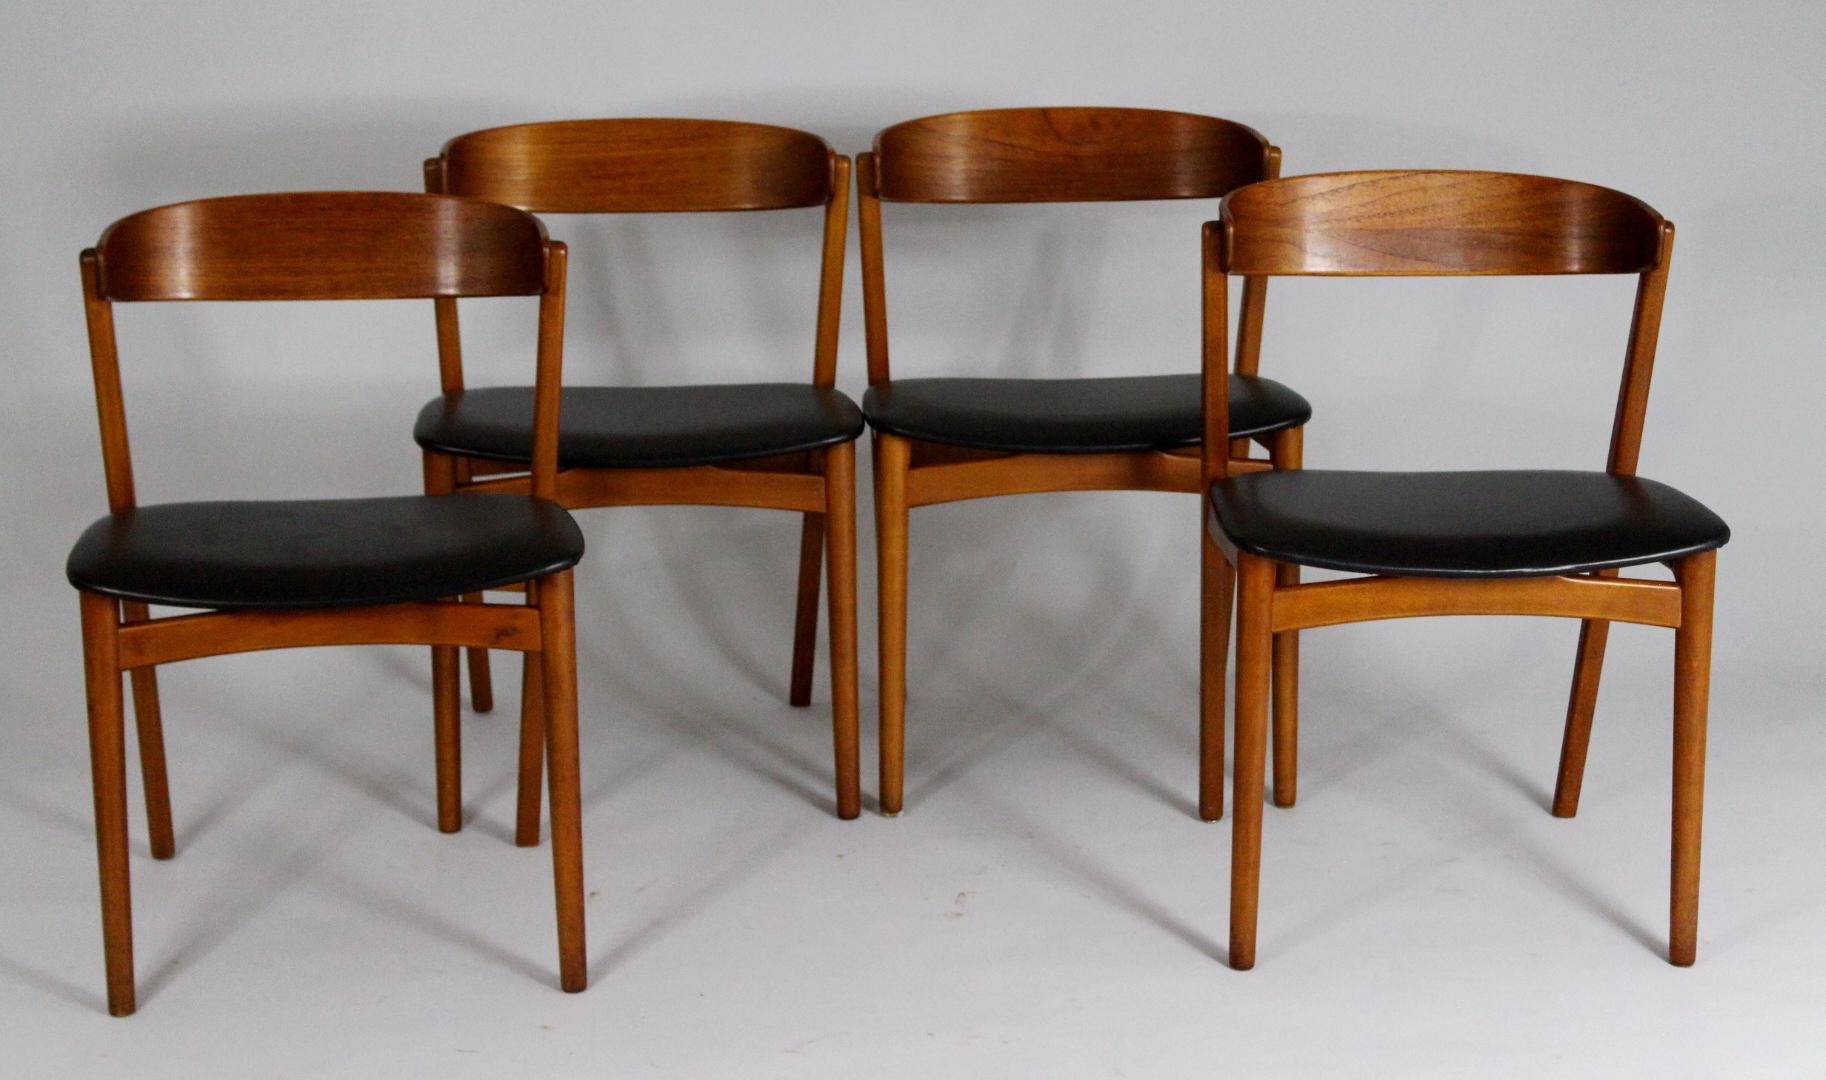 Faux Leather 1960s Set of Four Teak Dining Chairs, Denmark